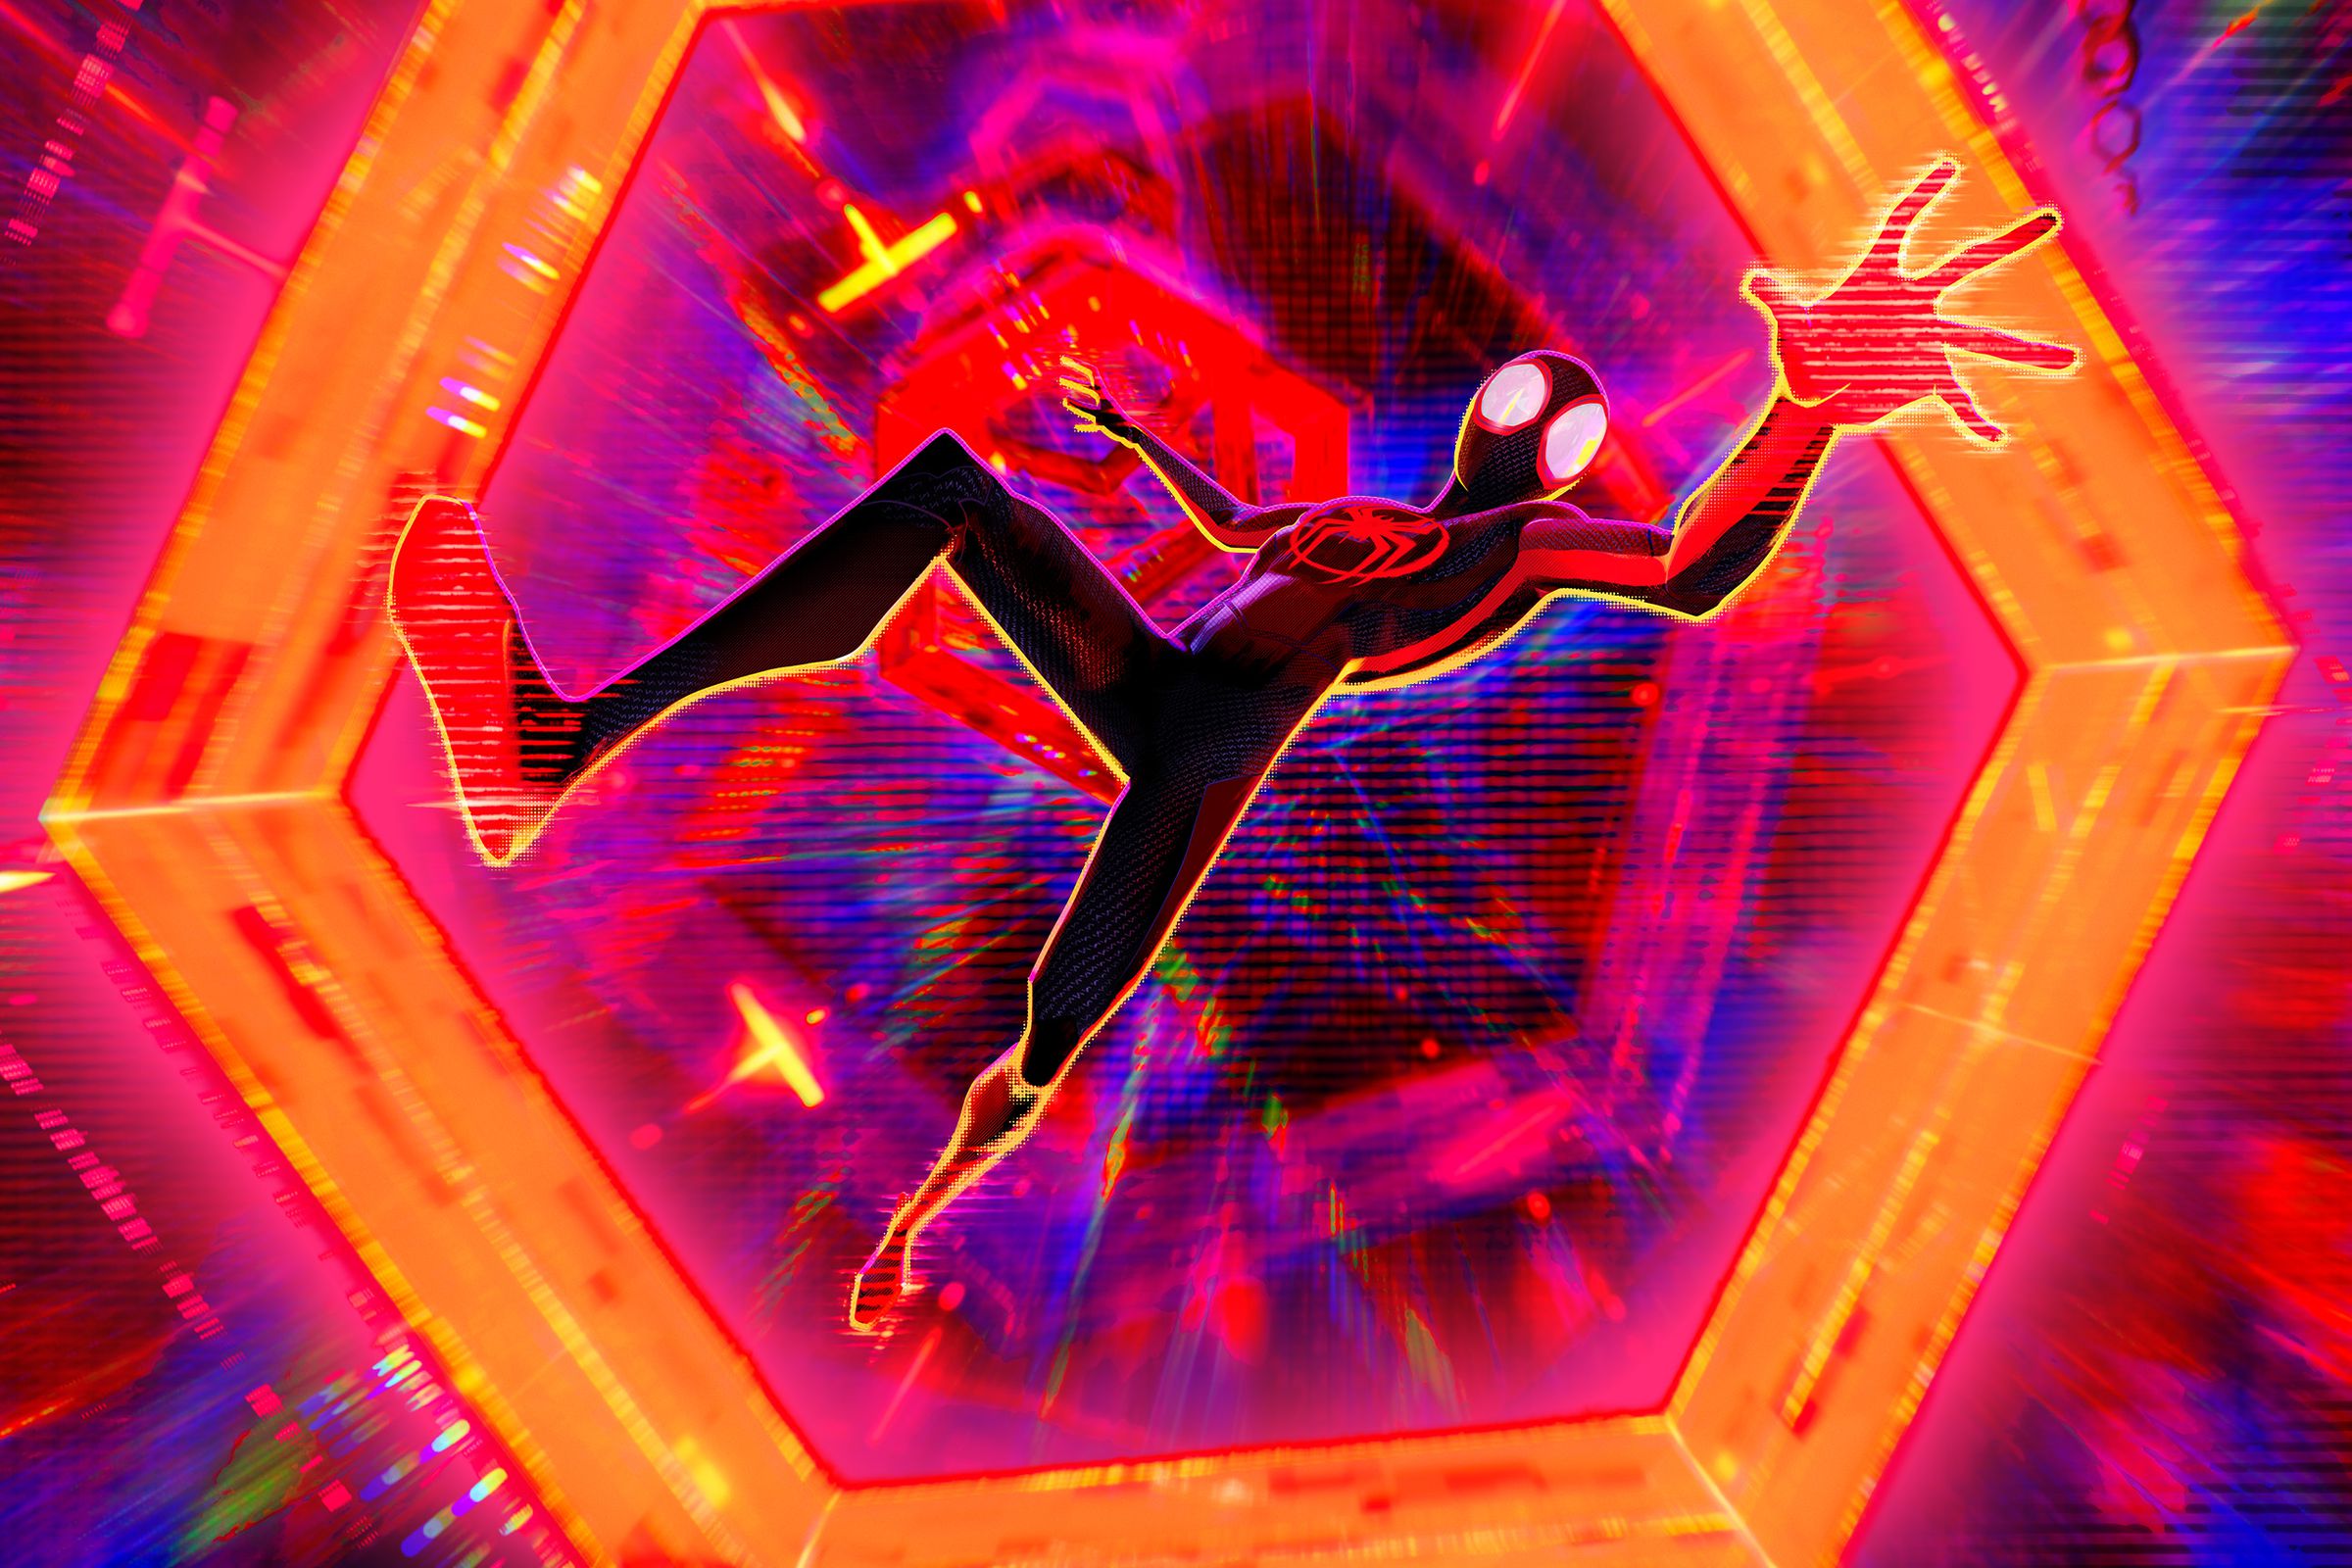 Miles Morales in his Spider-Man suit either falling through or being sucked into a hexagonal vortex made of glowing orange, red, and blue light.